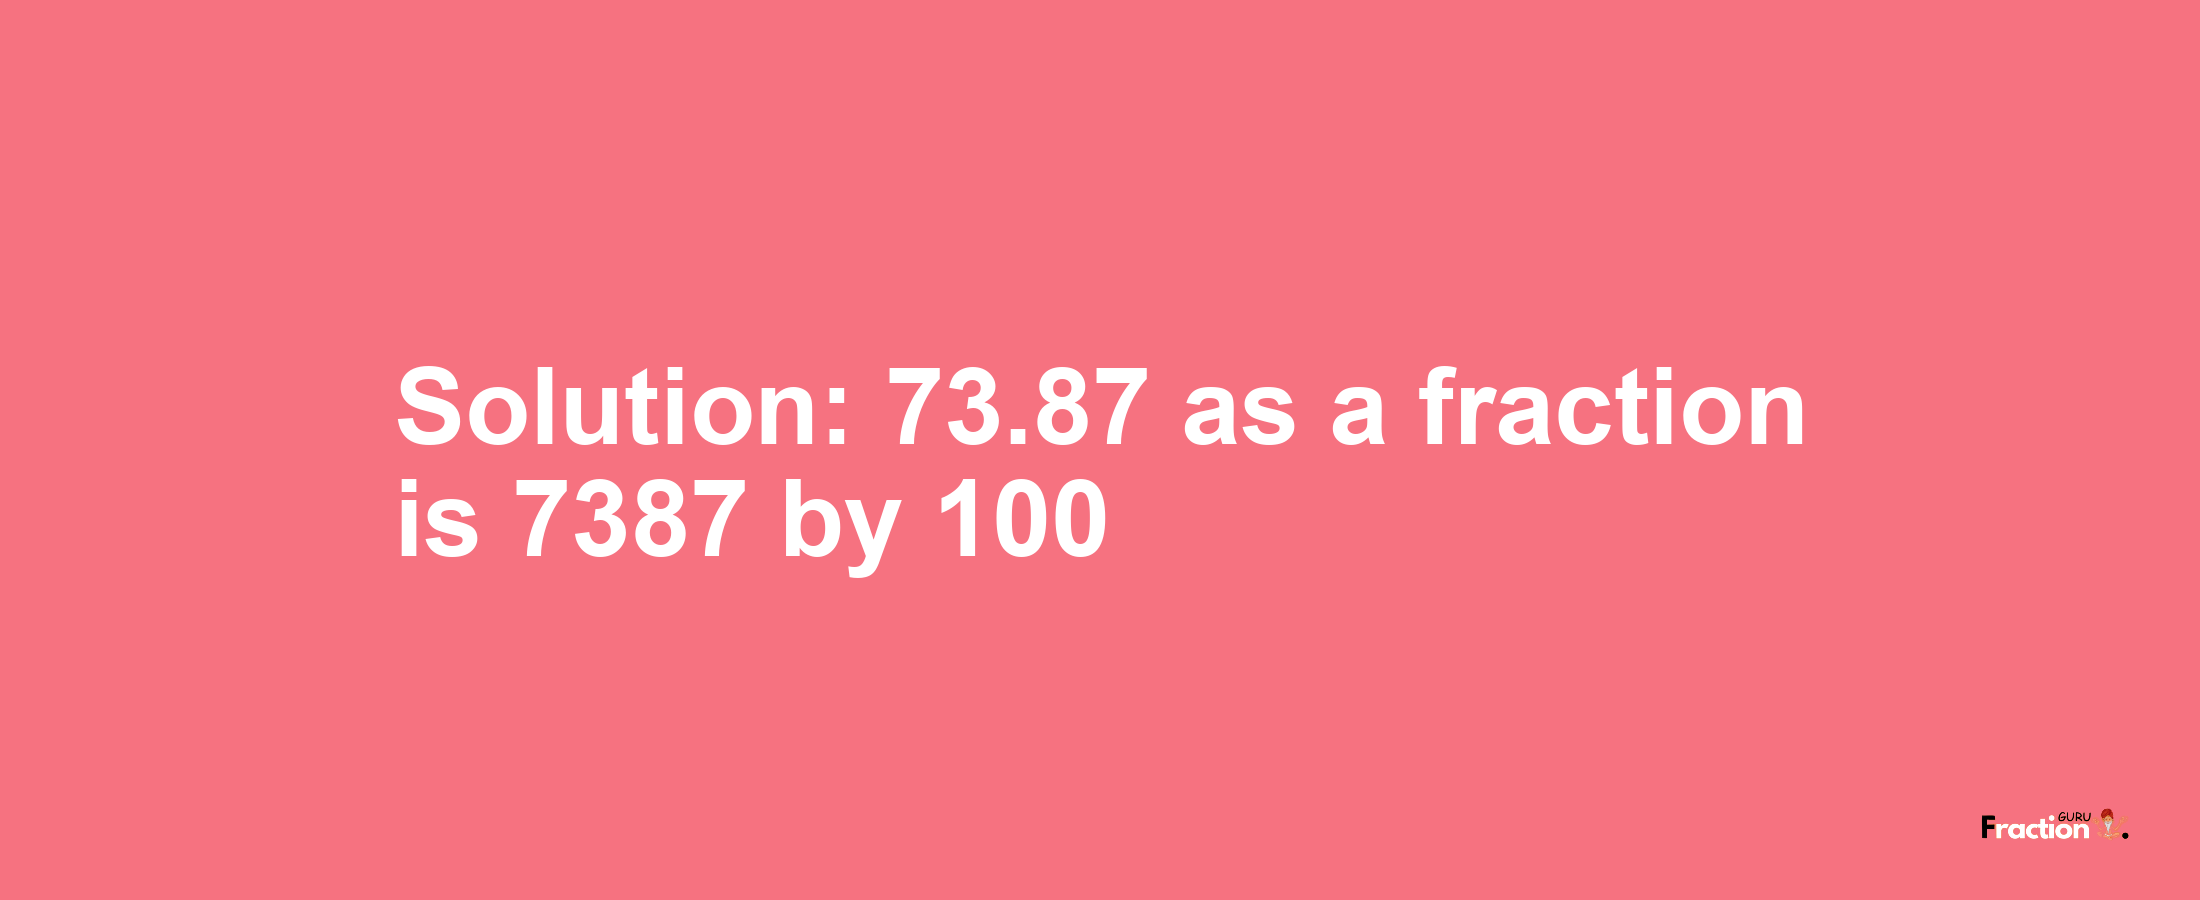 Solution:73.87 as a fraction is 7387/100